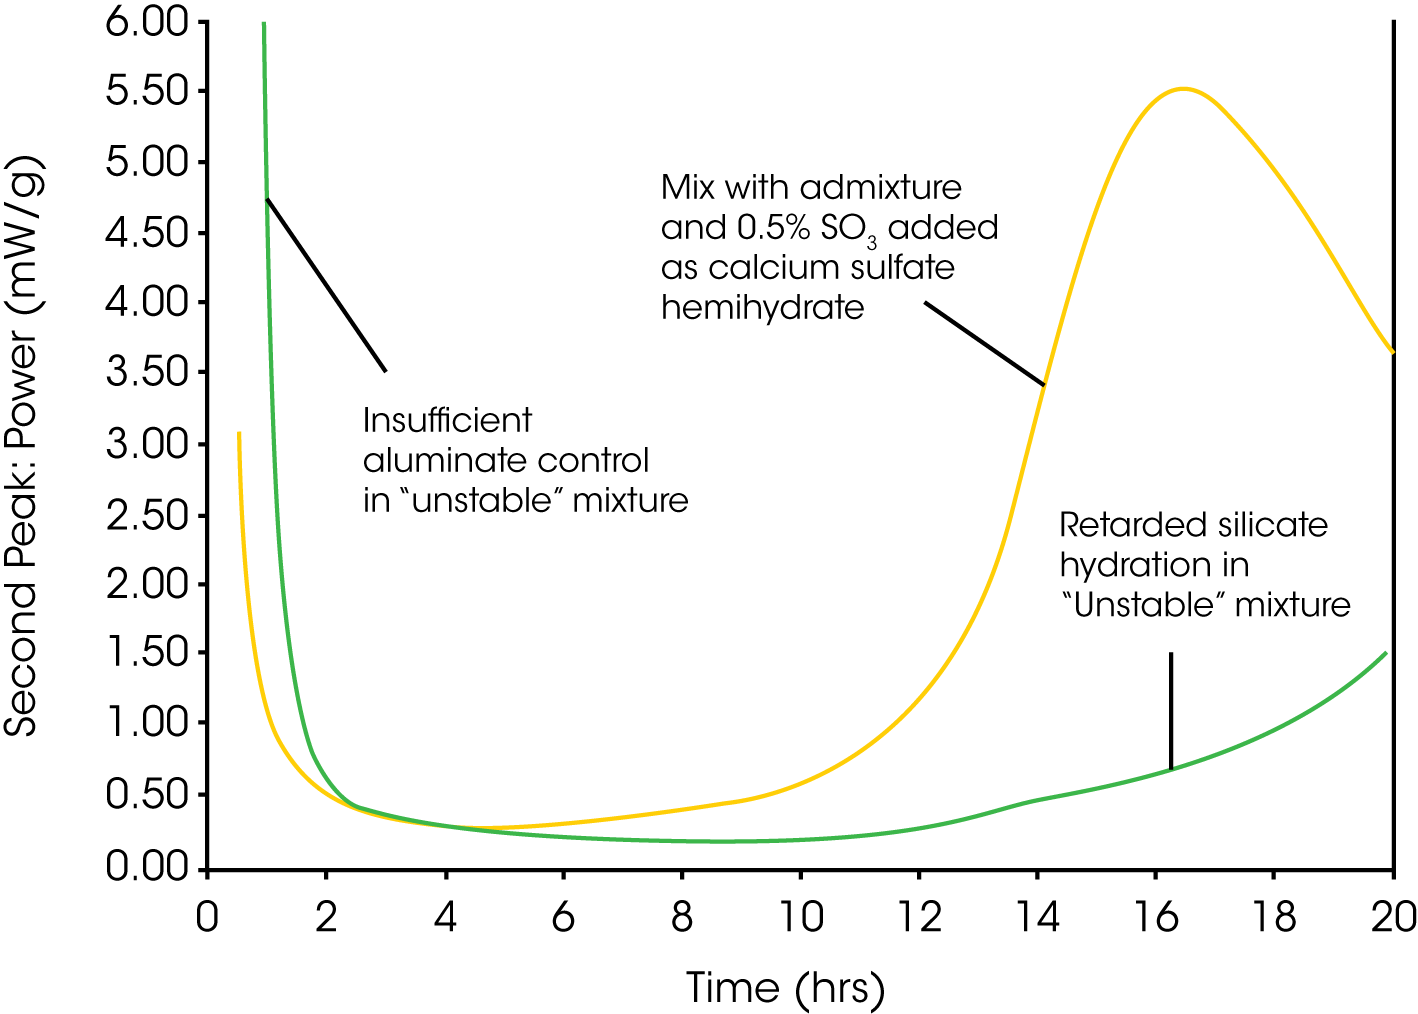 Figure 2. Soluble sulfate test on an “unstable” cement-admixture combination by monitoring the timing of the main silicate hydration peak. An ASTM Type A Water reducing admixture was used according to the manufacturers recommendations (0.4% s/s). Green plot is the “unstable” mixture; Yellow plot is the same mixture with 0.5% SO3 added to the cement as plaster. The cement used meets the specification for ASTM Type I Portland cement, 2.3% SO3, BSA 370 m2/kg.